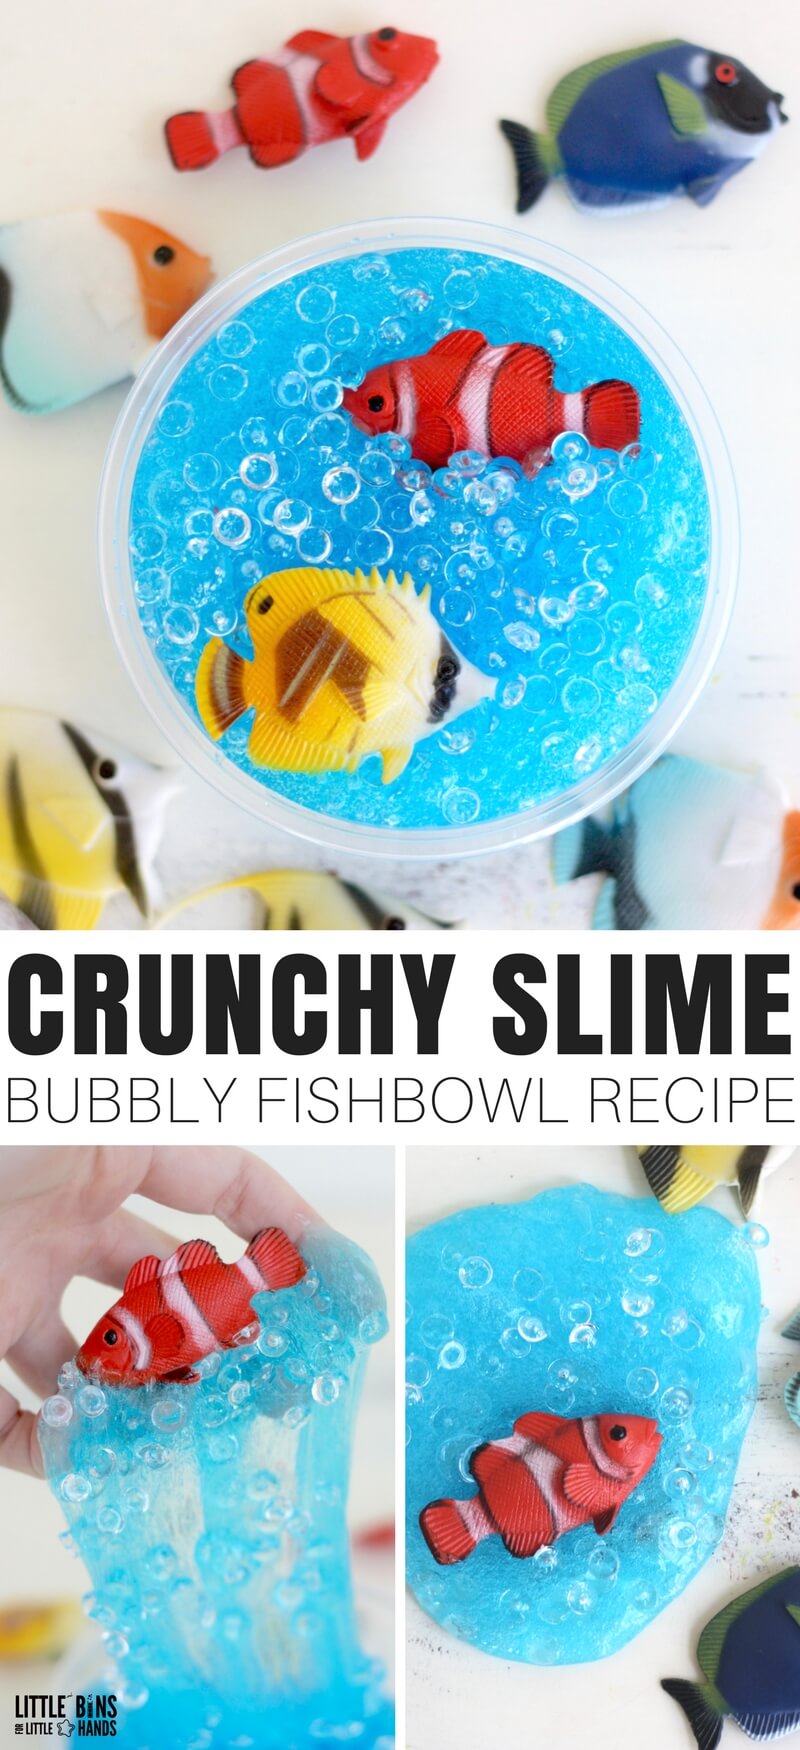 Learn how to make crunchy slime with crunchy fishbowl slushy beads! A cool textured slime recipe with a fun fishy theme. Making homemade slime is super easy with our basic slime recipes that kids will love to make!